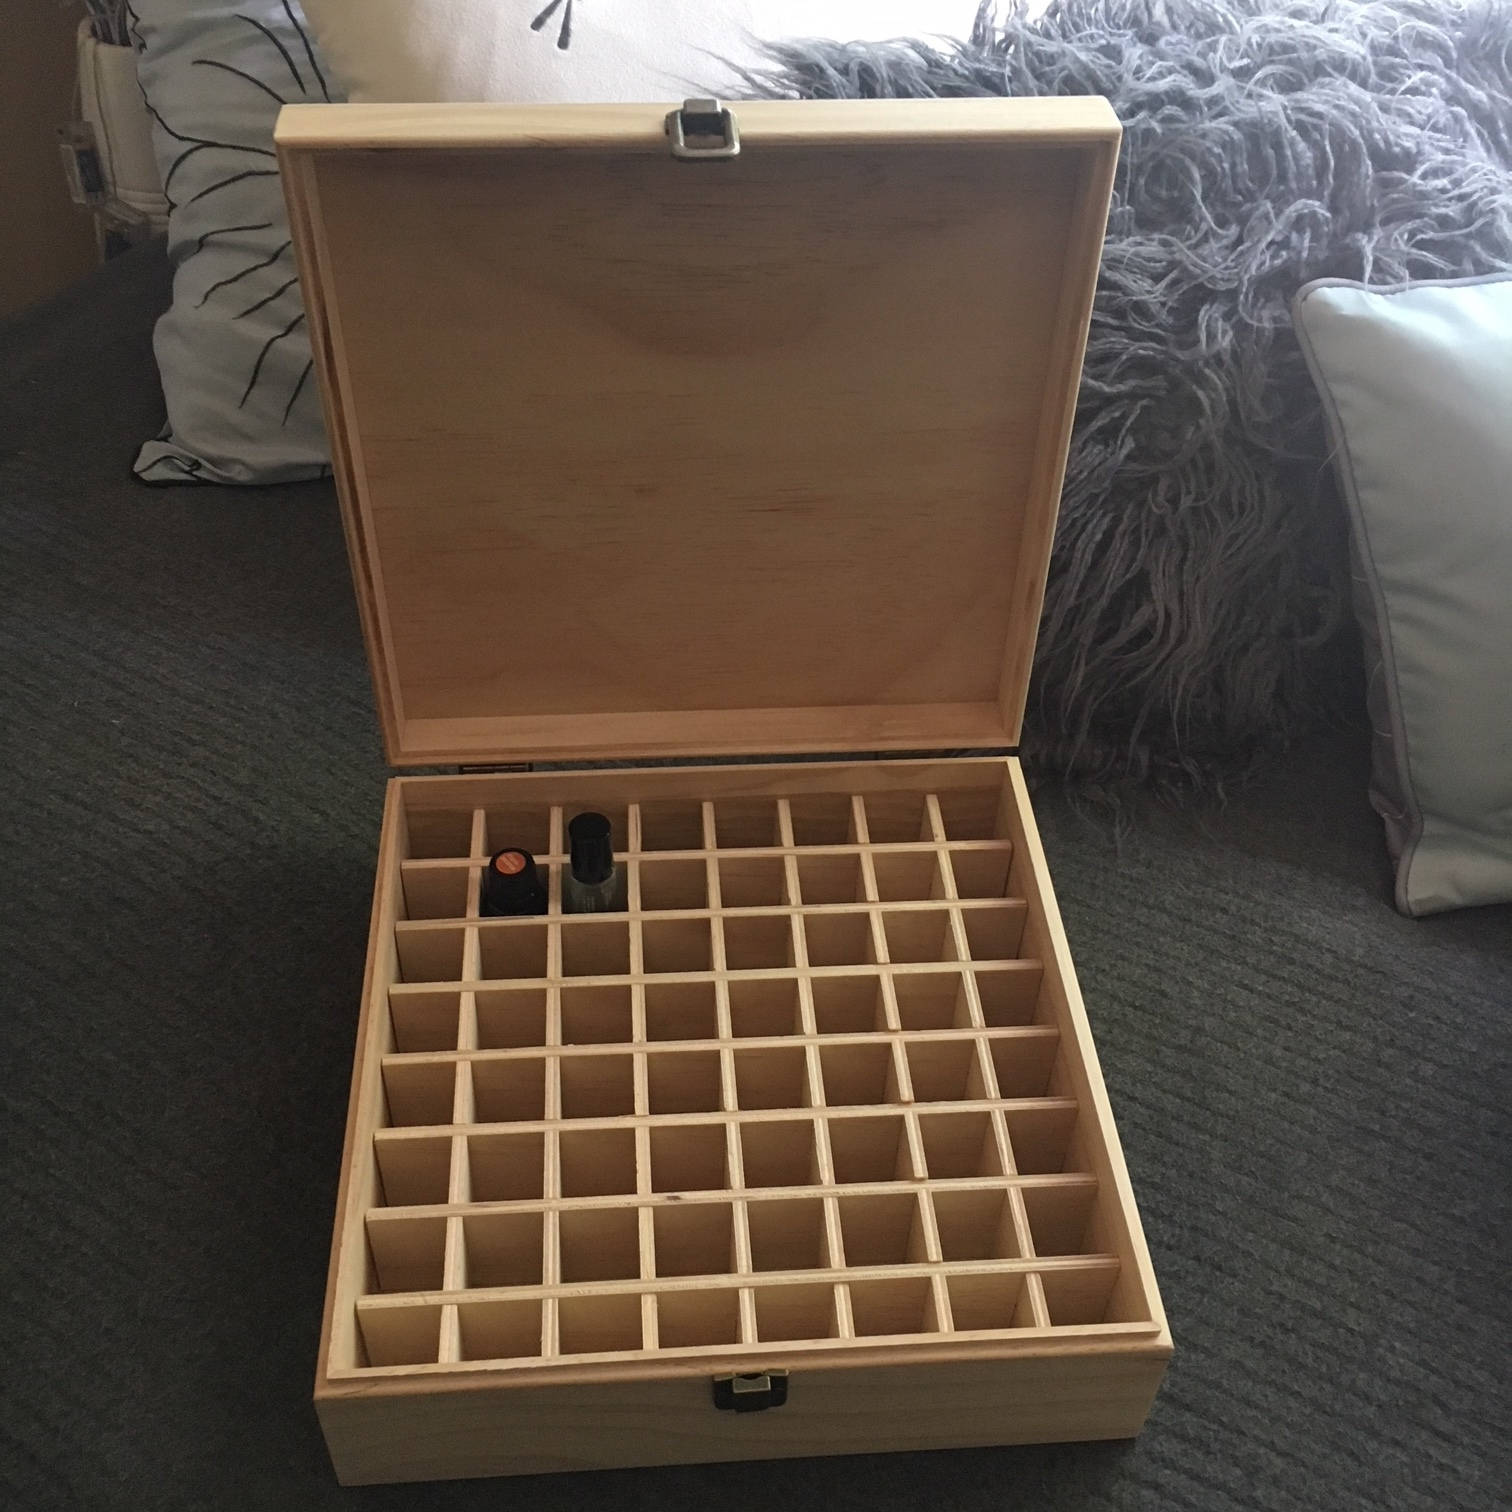 The Oil Shrine Essential Oil Storage Box, Holds Over 350 Essential